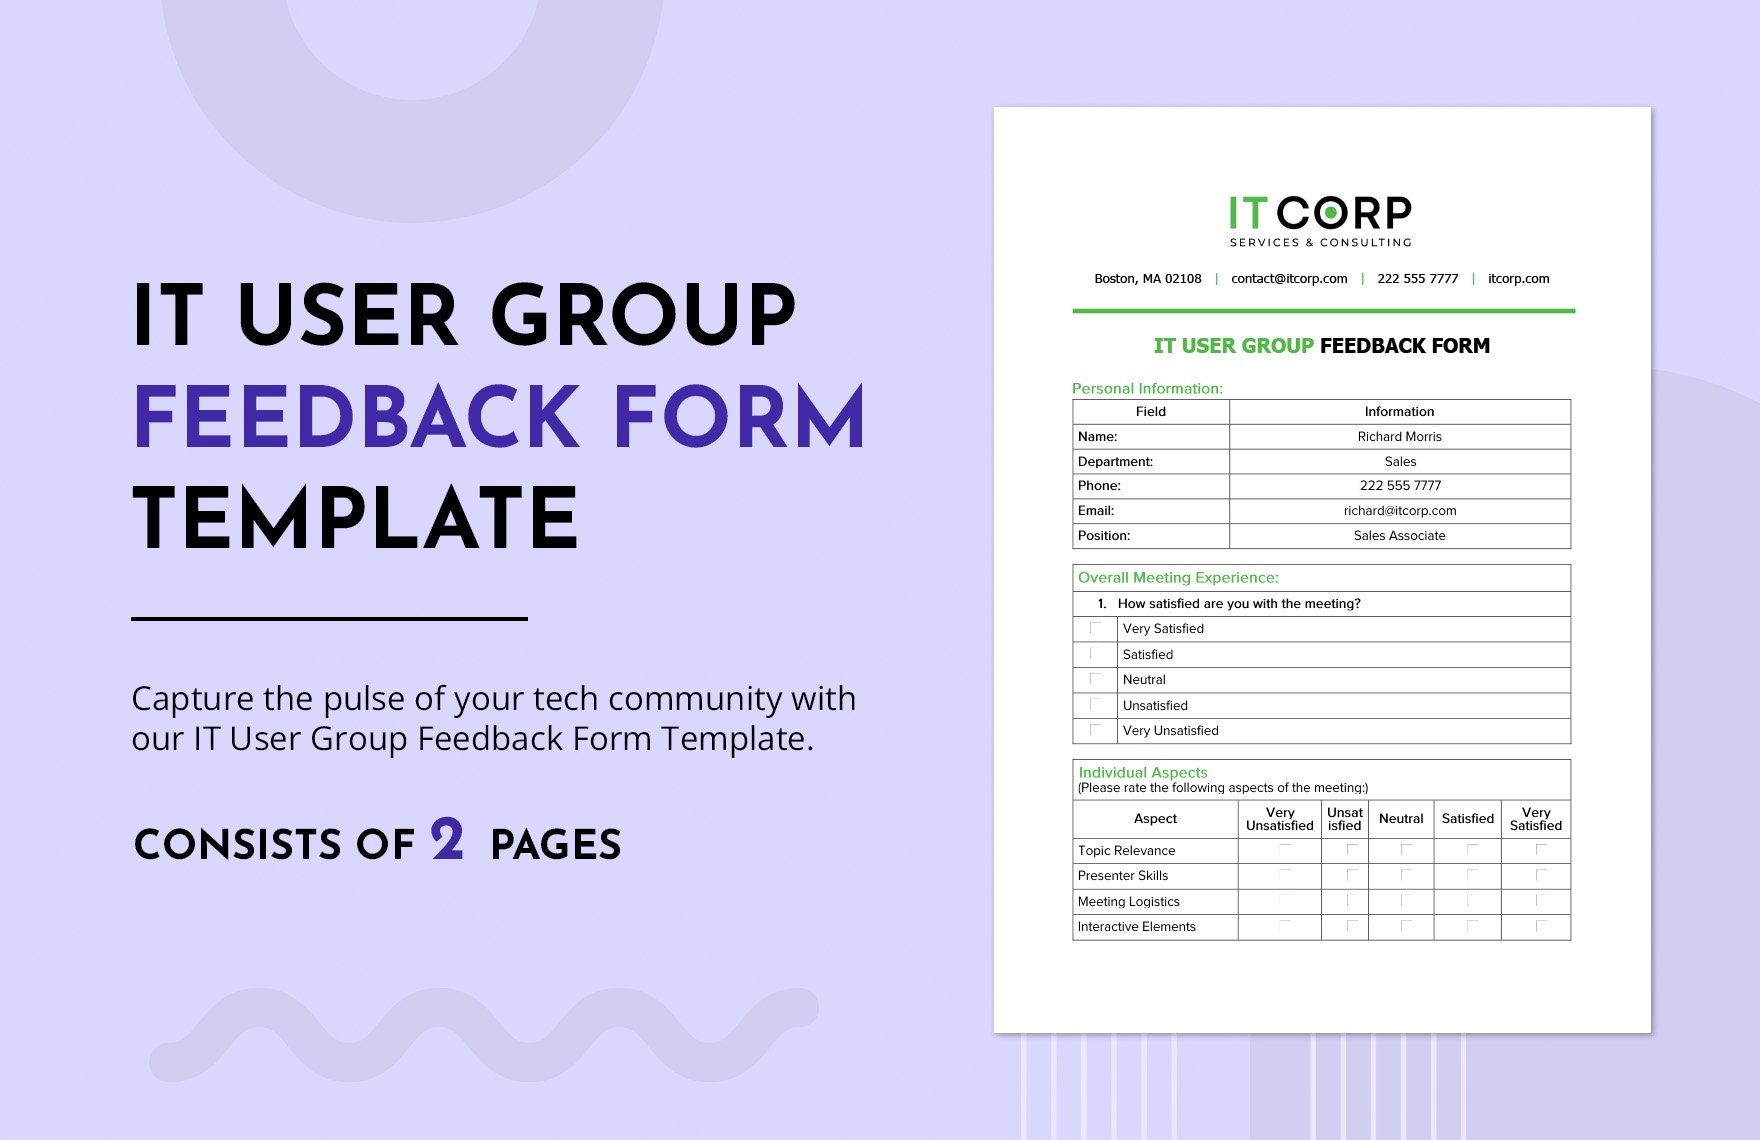 IT User Group Feedback Form Template